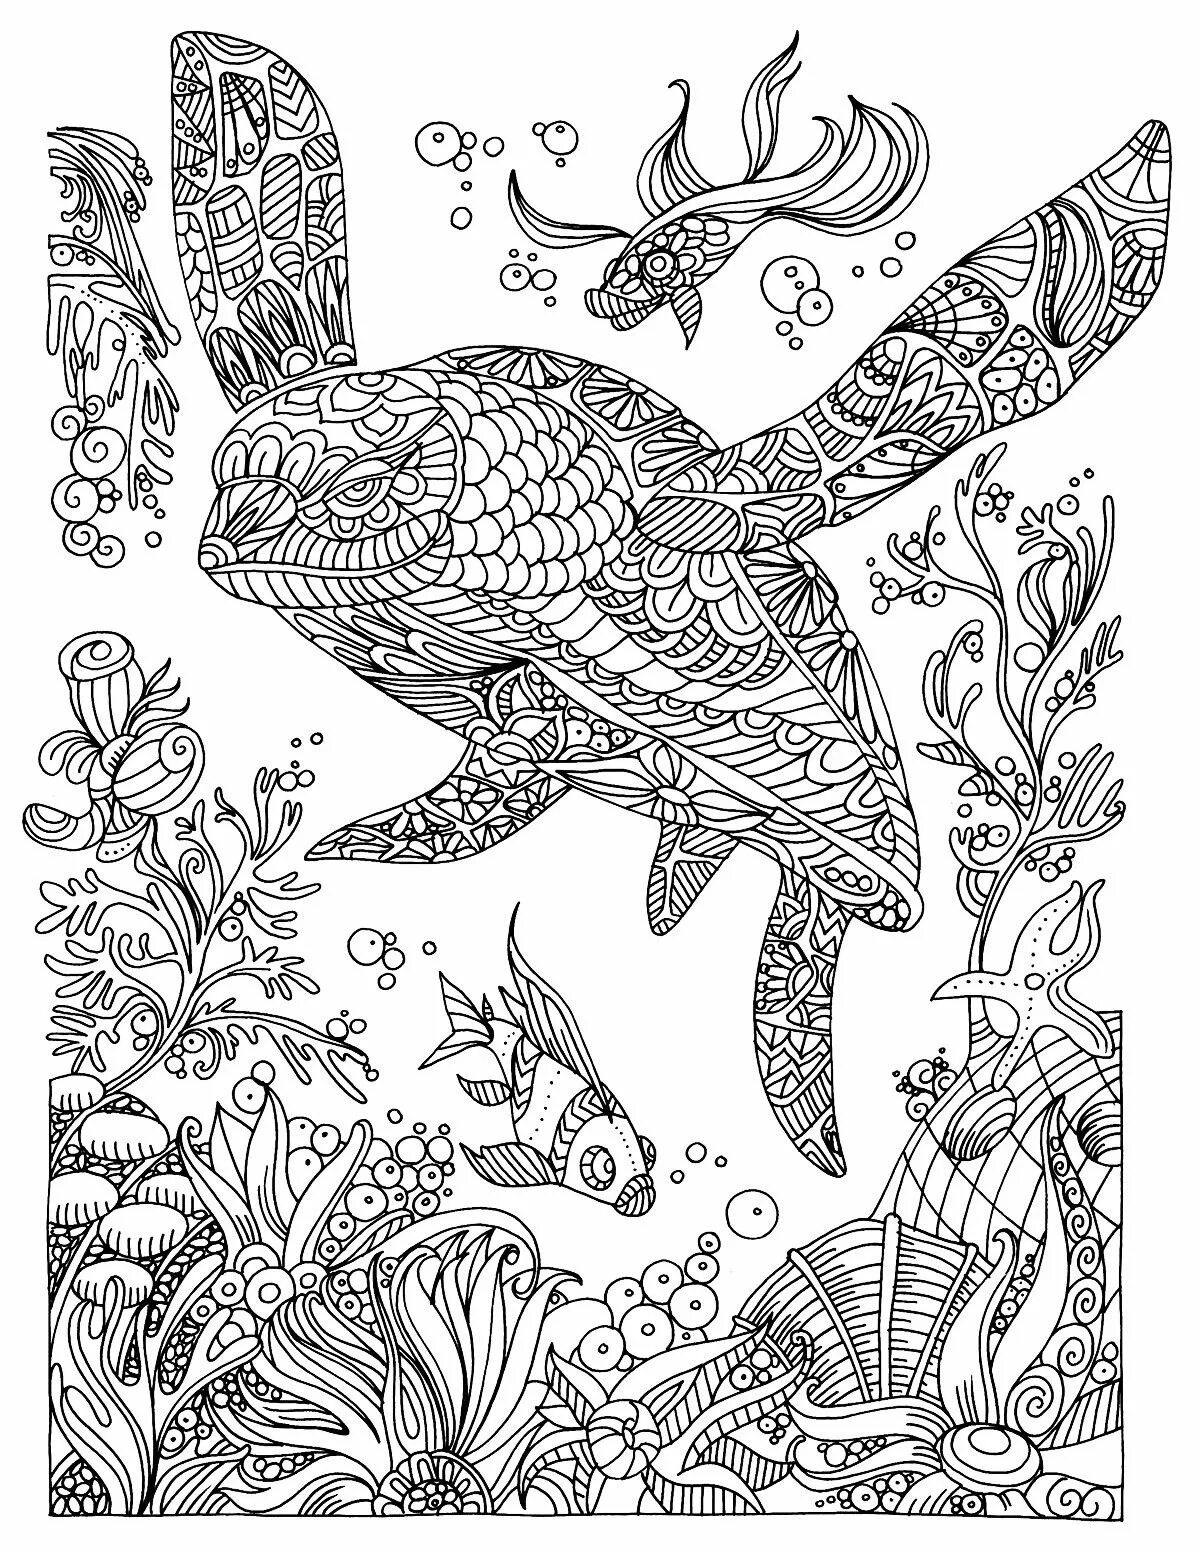 Exciting anti-stress animal world coloring book